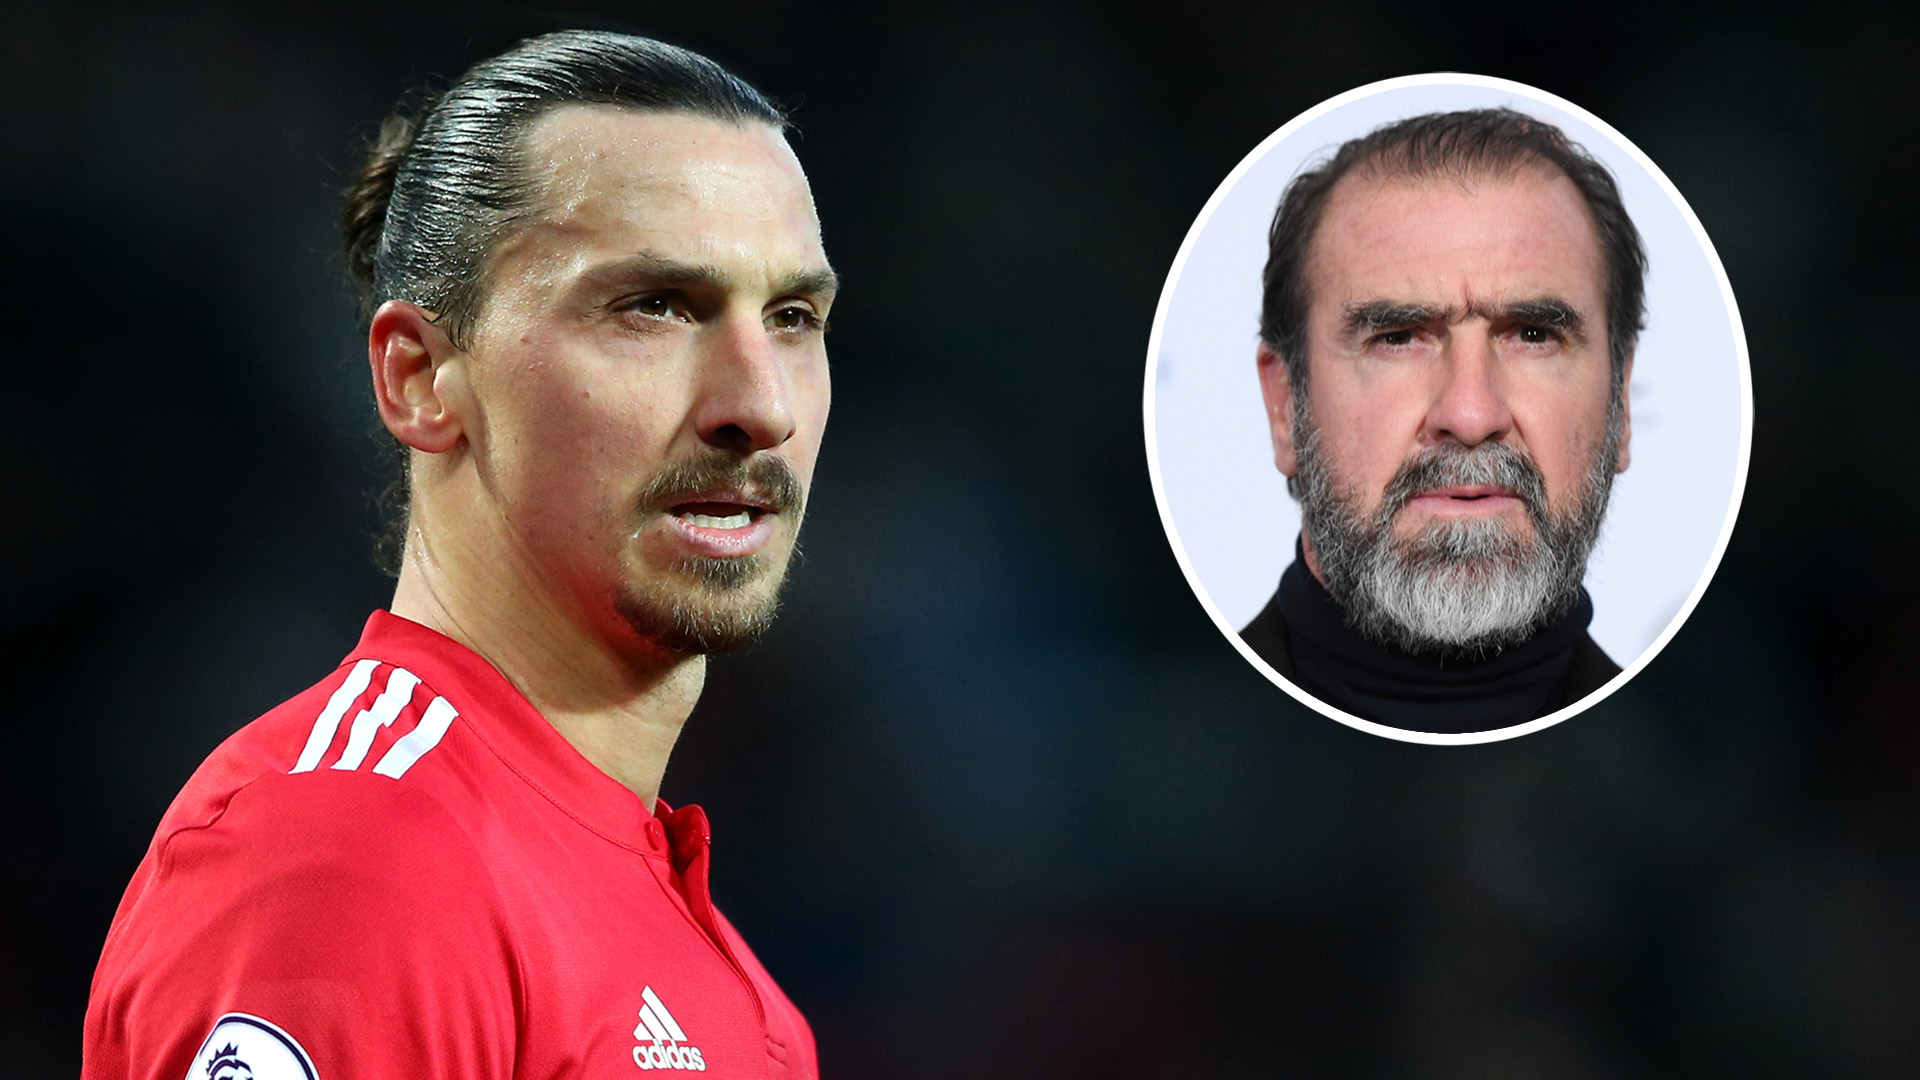 Ibrahimovic told Cantona he'd be 'god of Manchester' after Man Utd legend fired 'king' warning